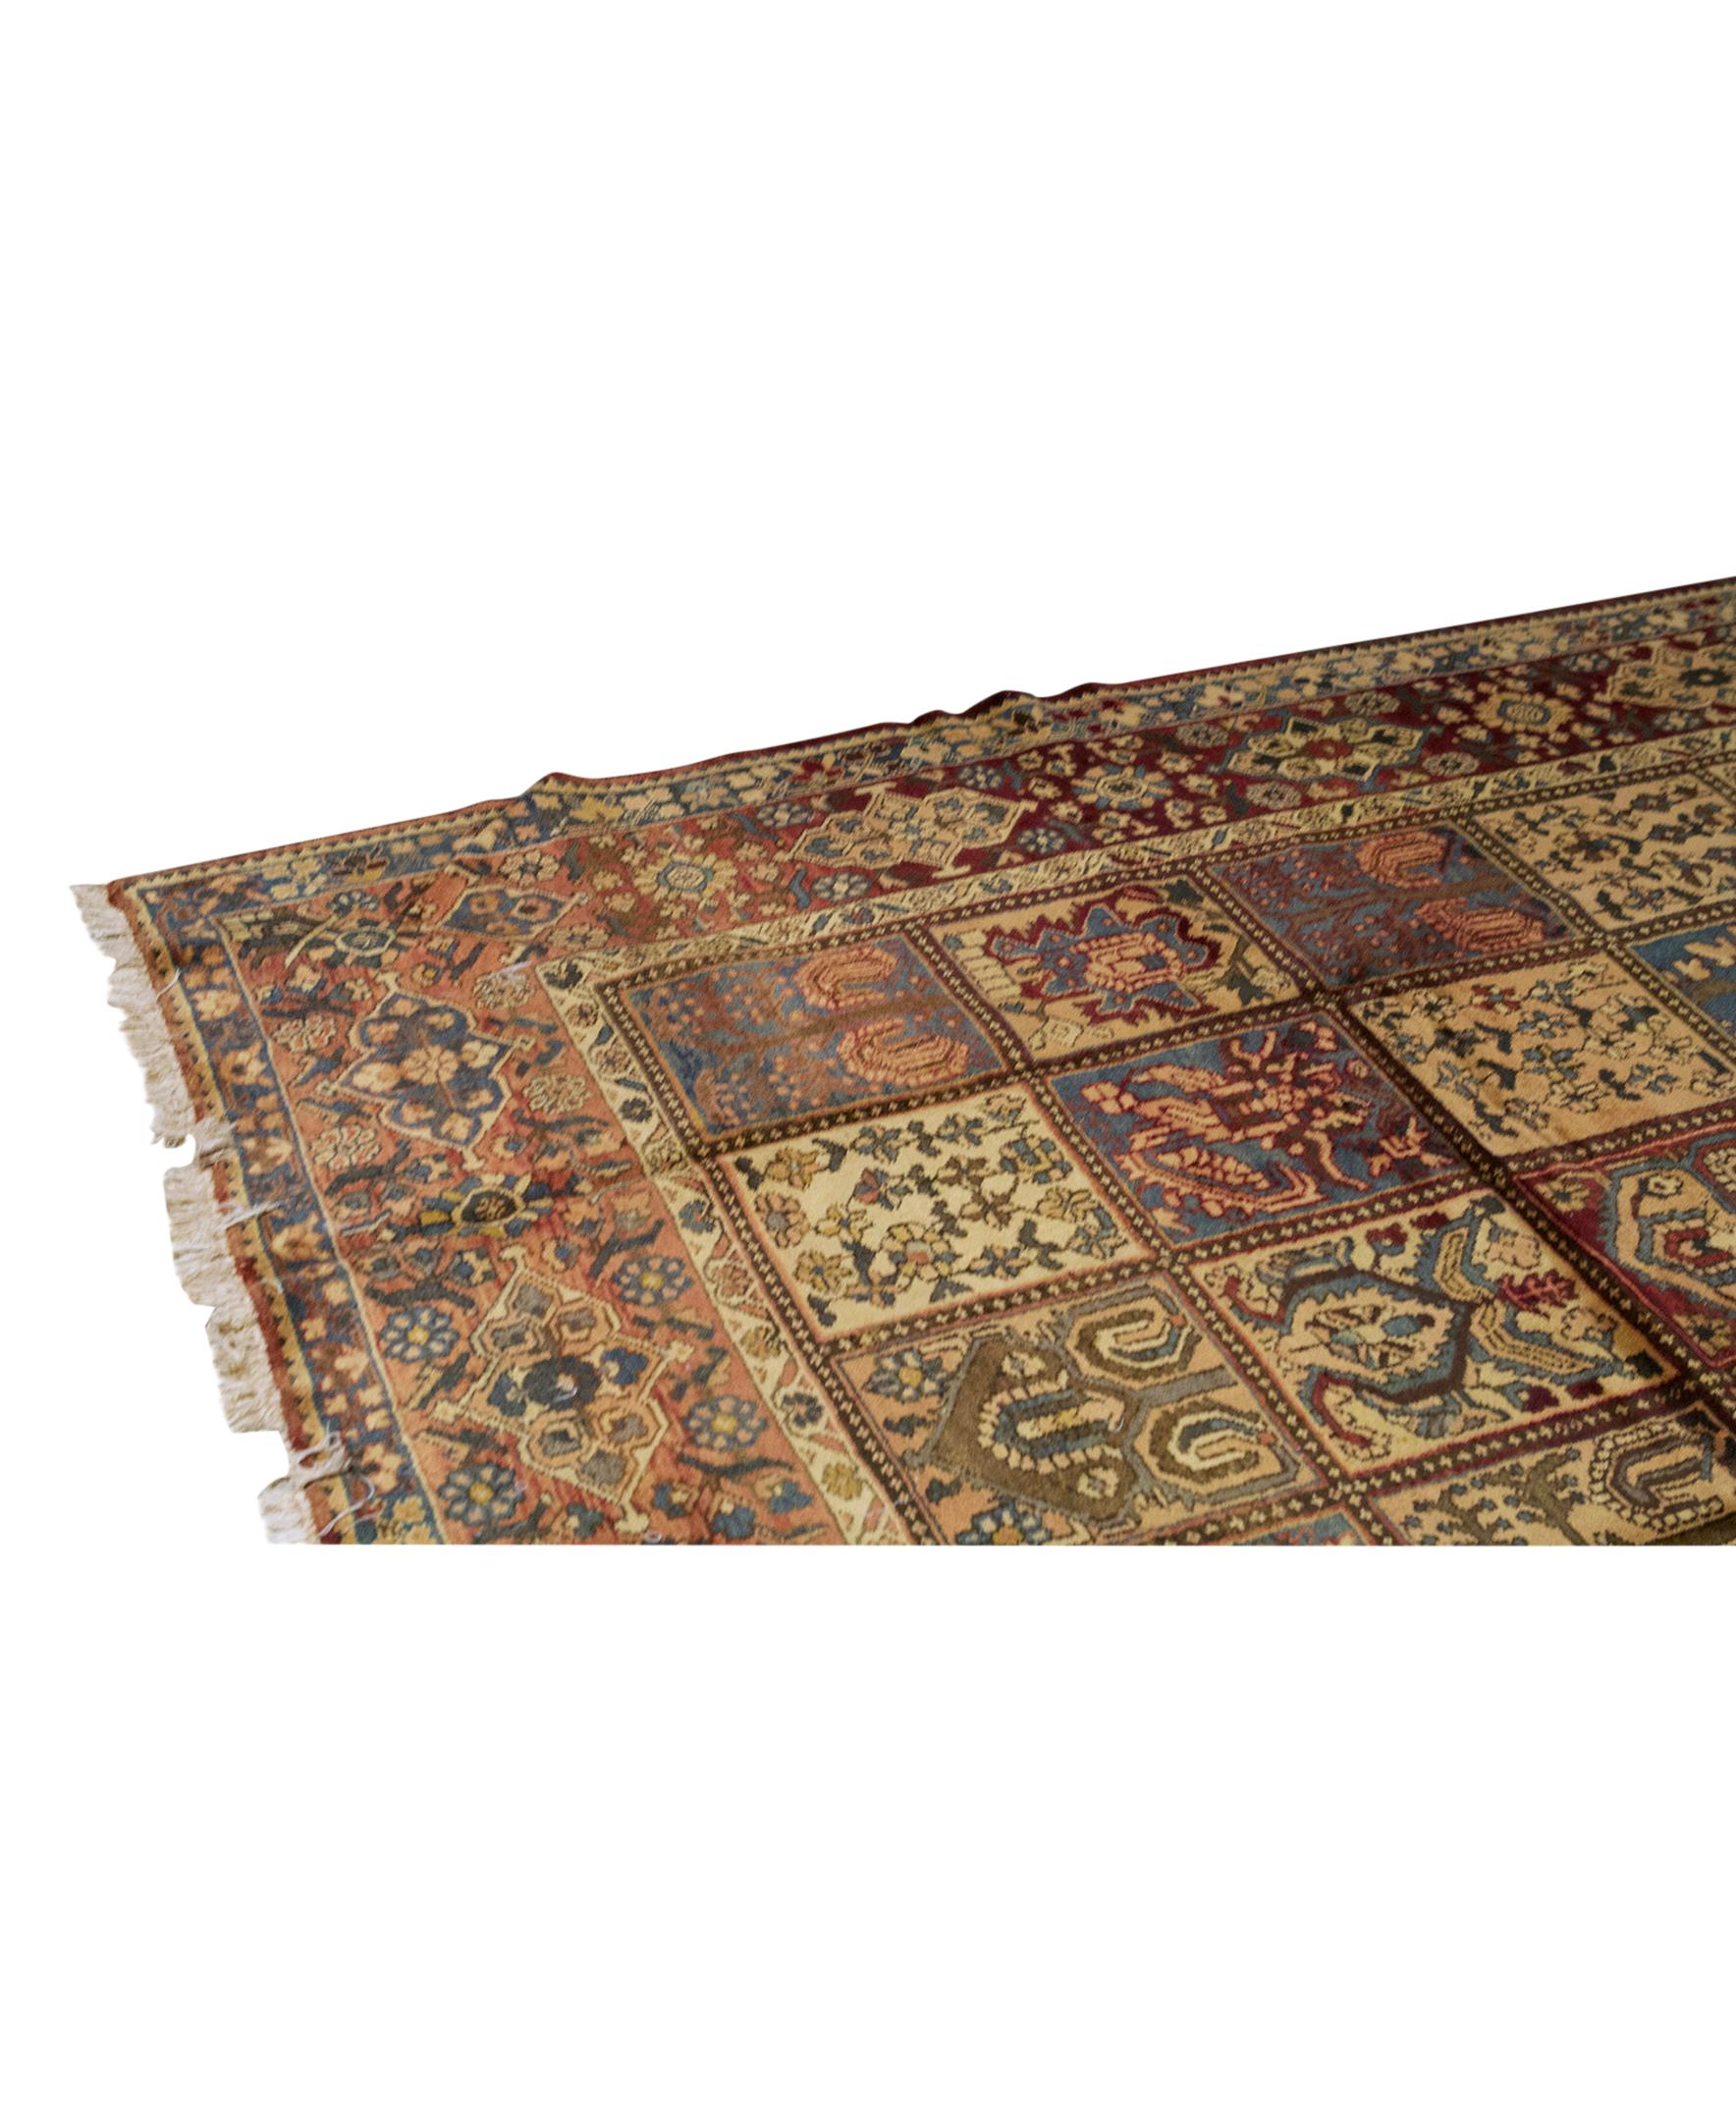  Antique Persian fine Traditional Handwoven Luxury Wool Multi Rug. Size: 10'-6